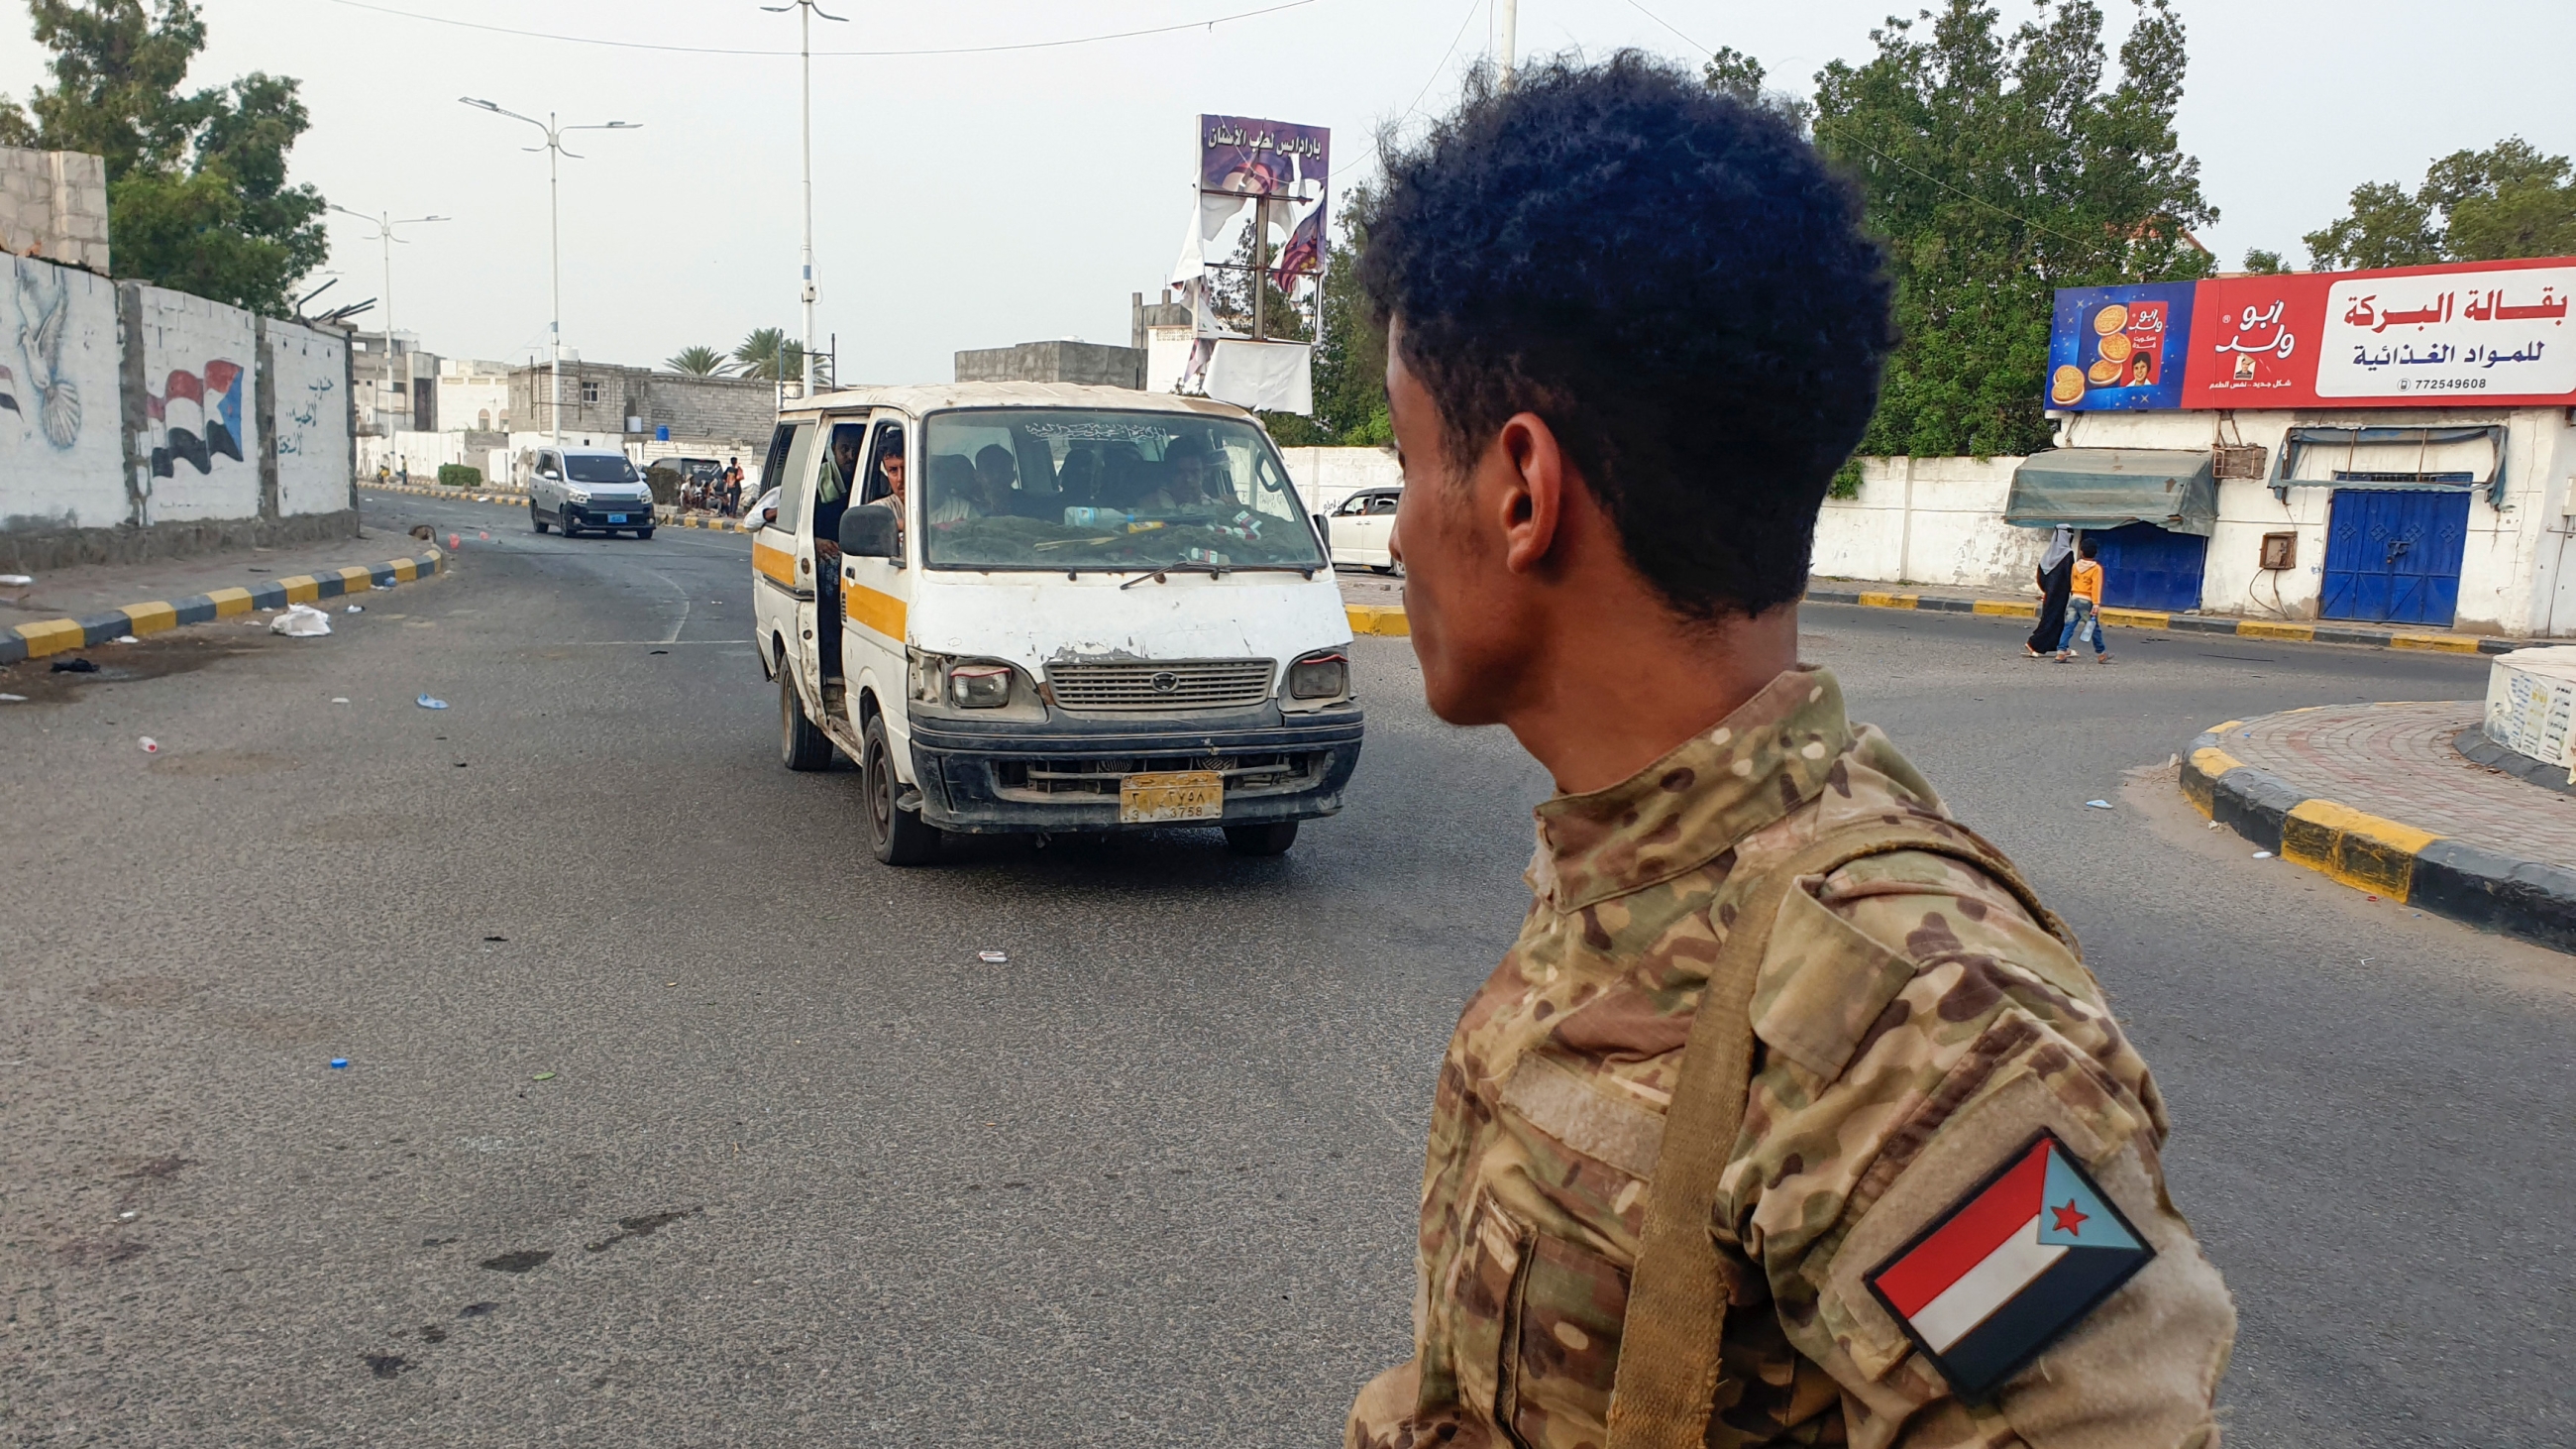 Fighters affiliated with Yemen's separatist Southern Transitional Council (STC) deploy in the city of Aden on 29 June 2022 (AFP)